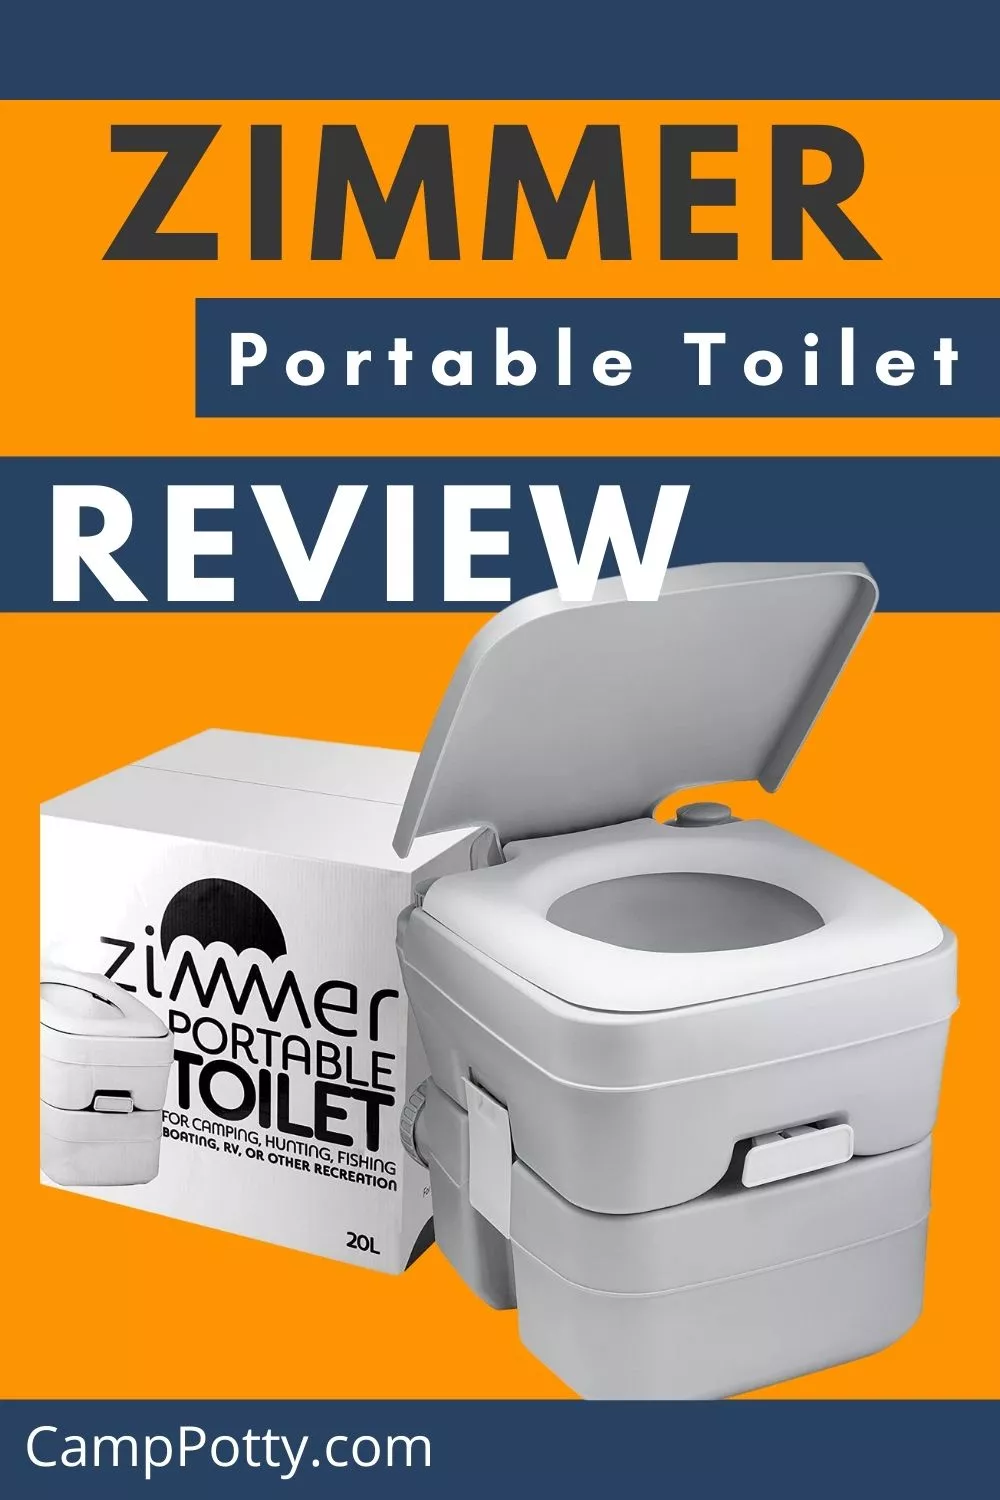 An in-depth review of ZIMMER Portable Toilet Review. pros and cons of the product, how to set up & use, Waste and who is it for.